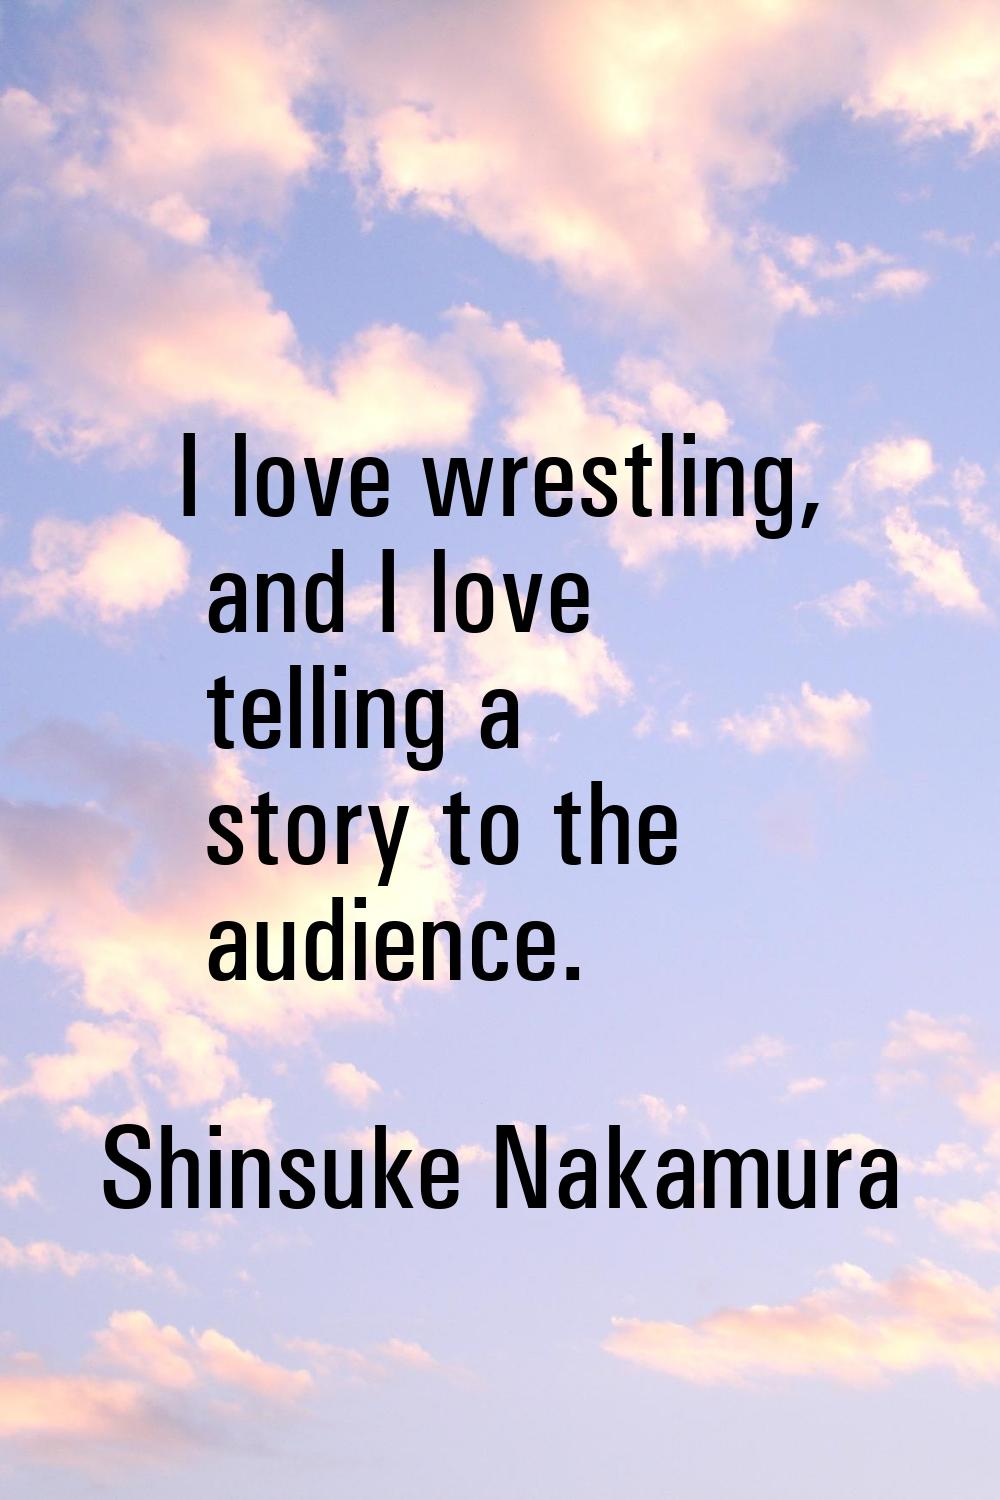 I love wrestling, and I love telling a story to the audience.